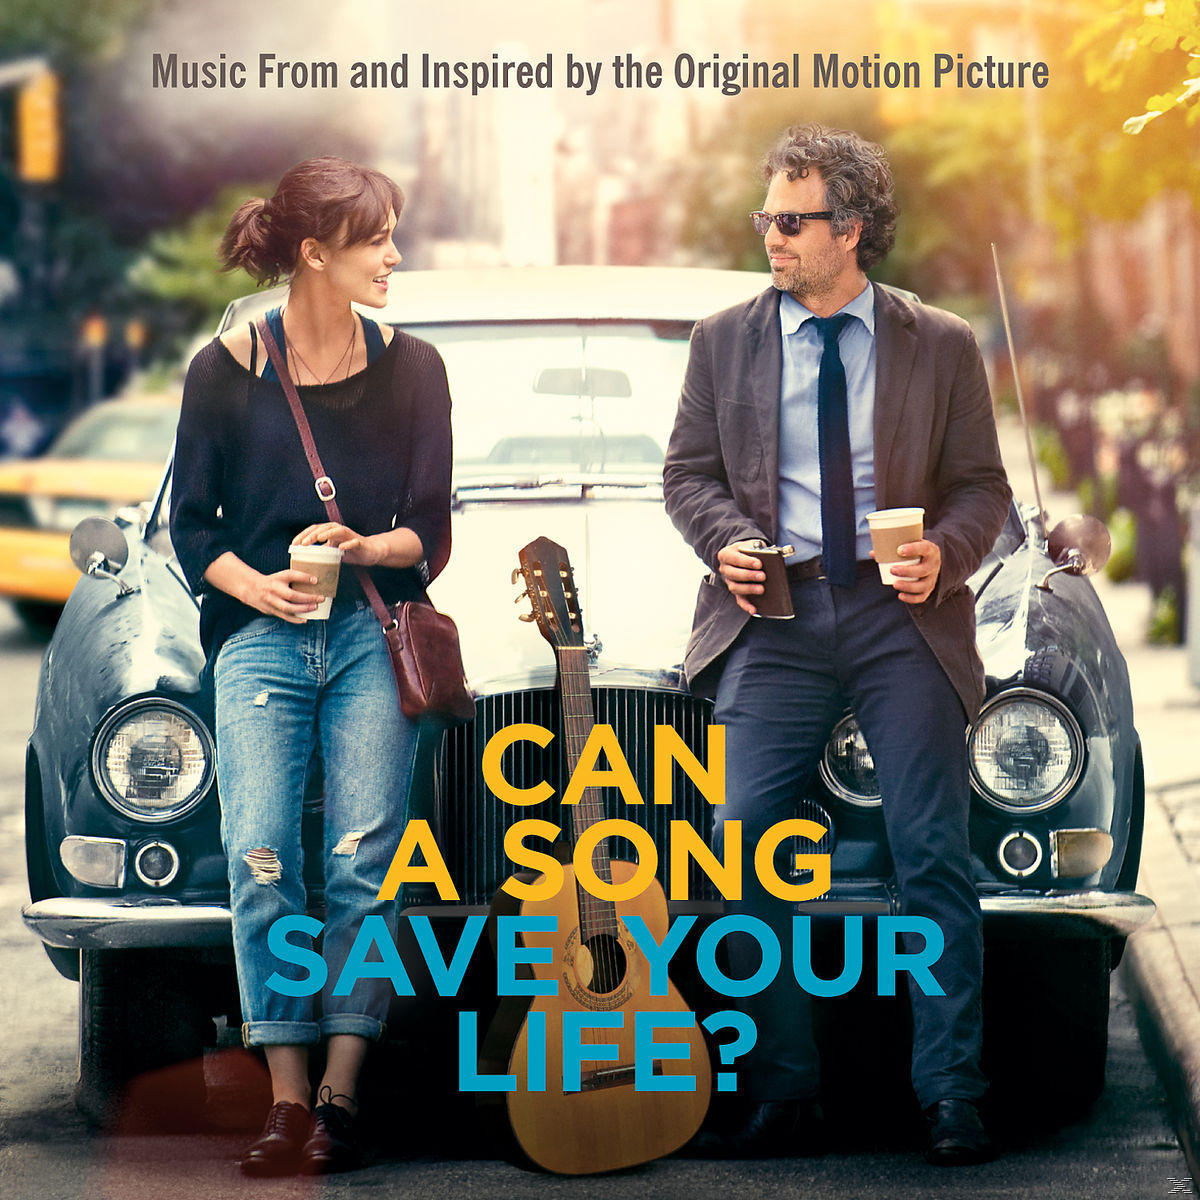 VARIOUS - - A Your (CD) Song Save Can Life